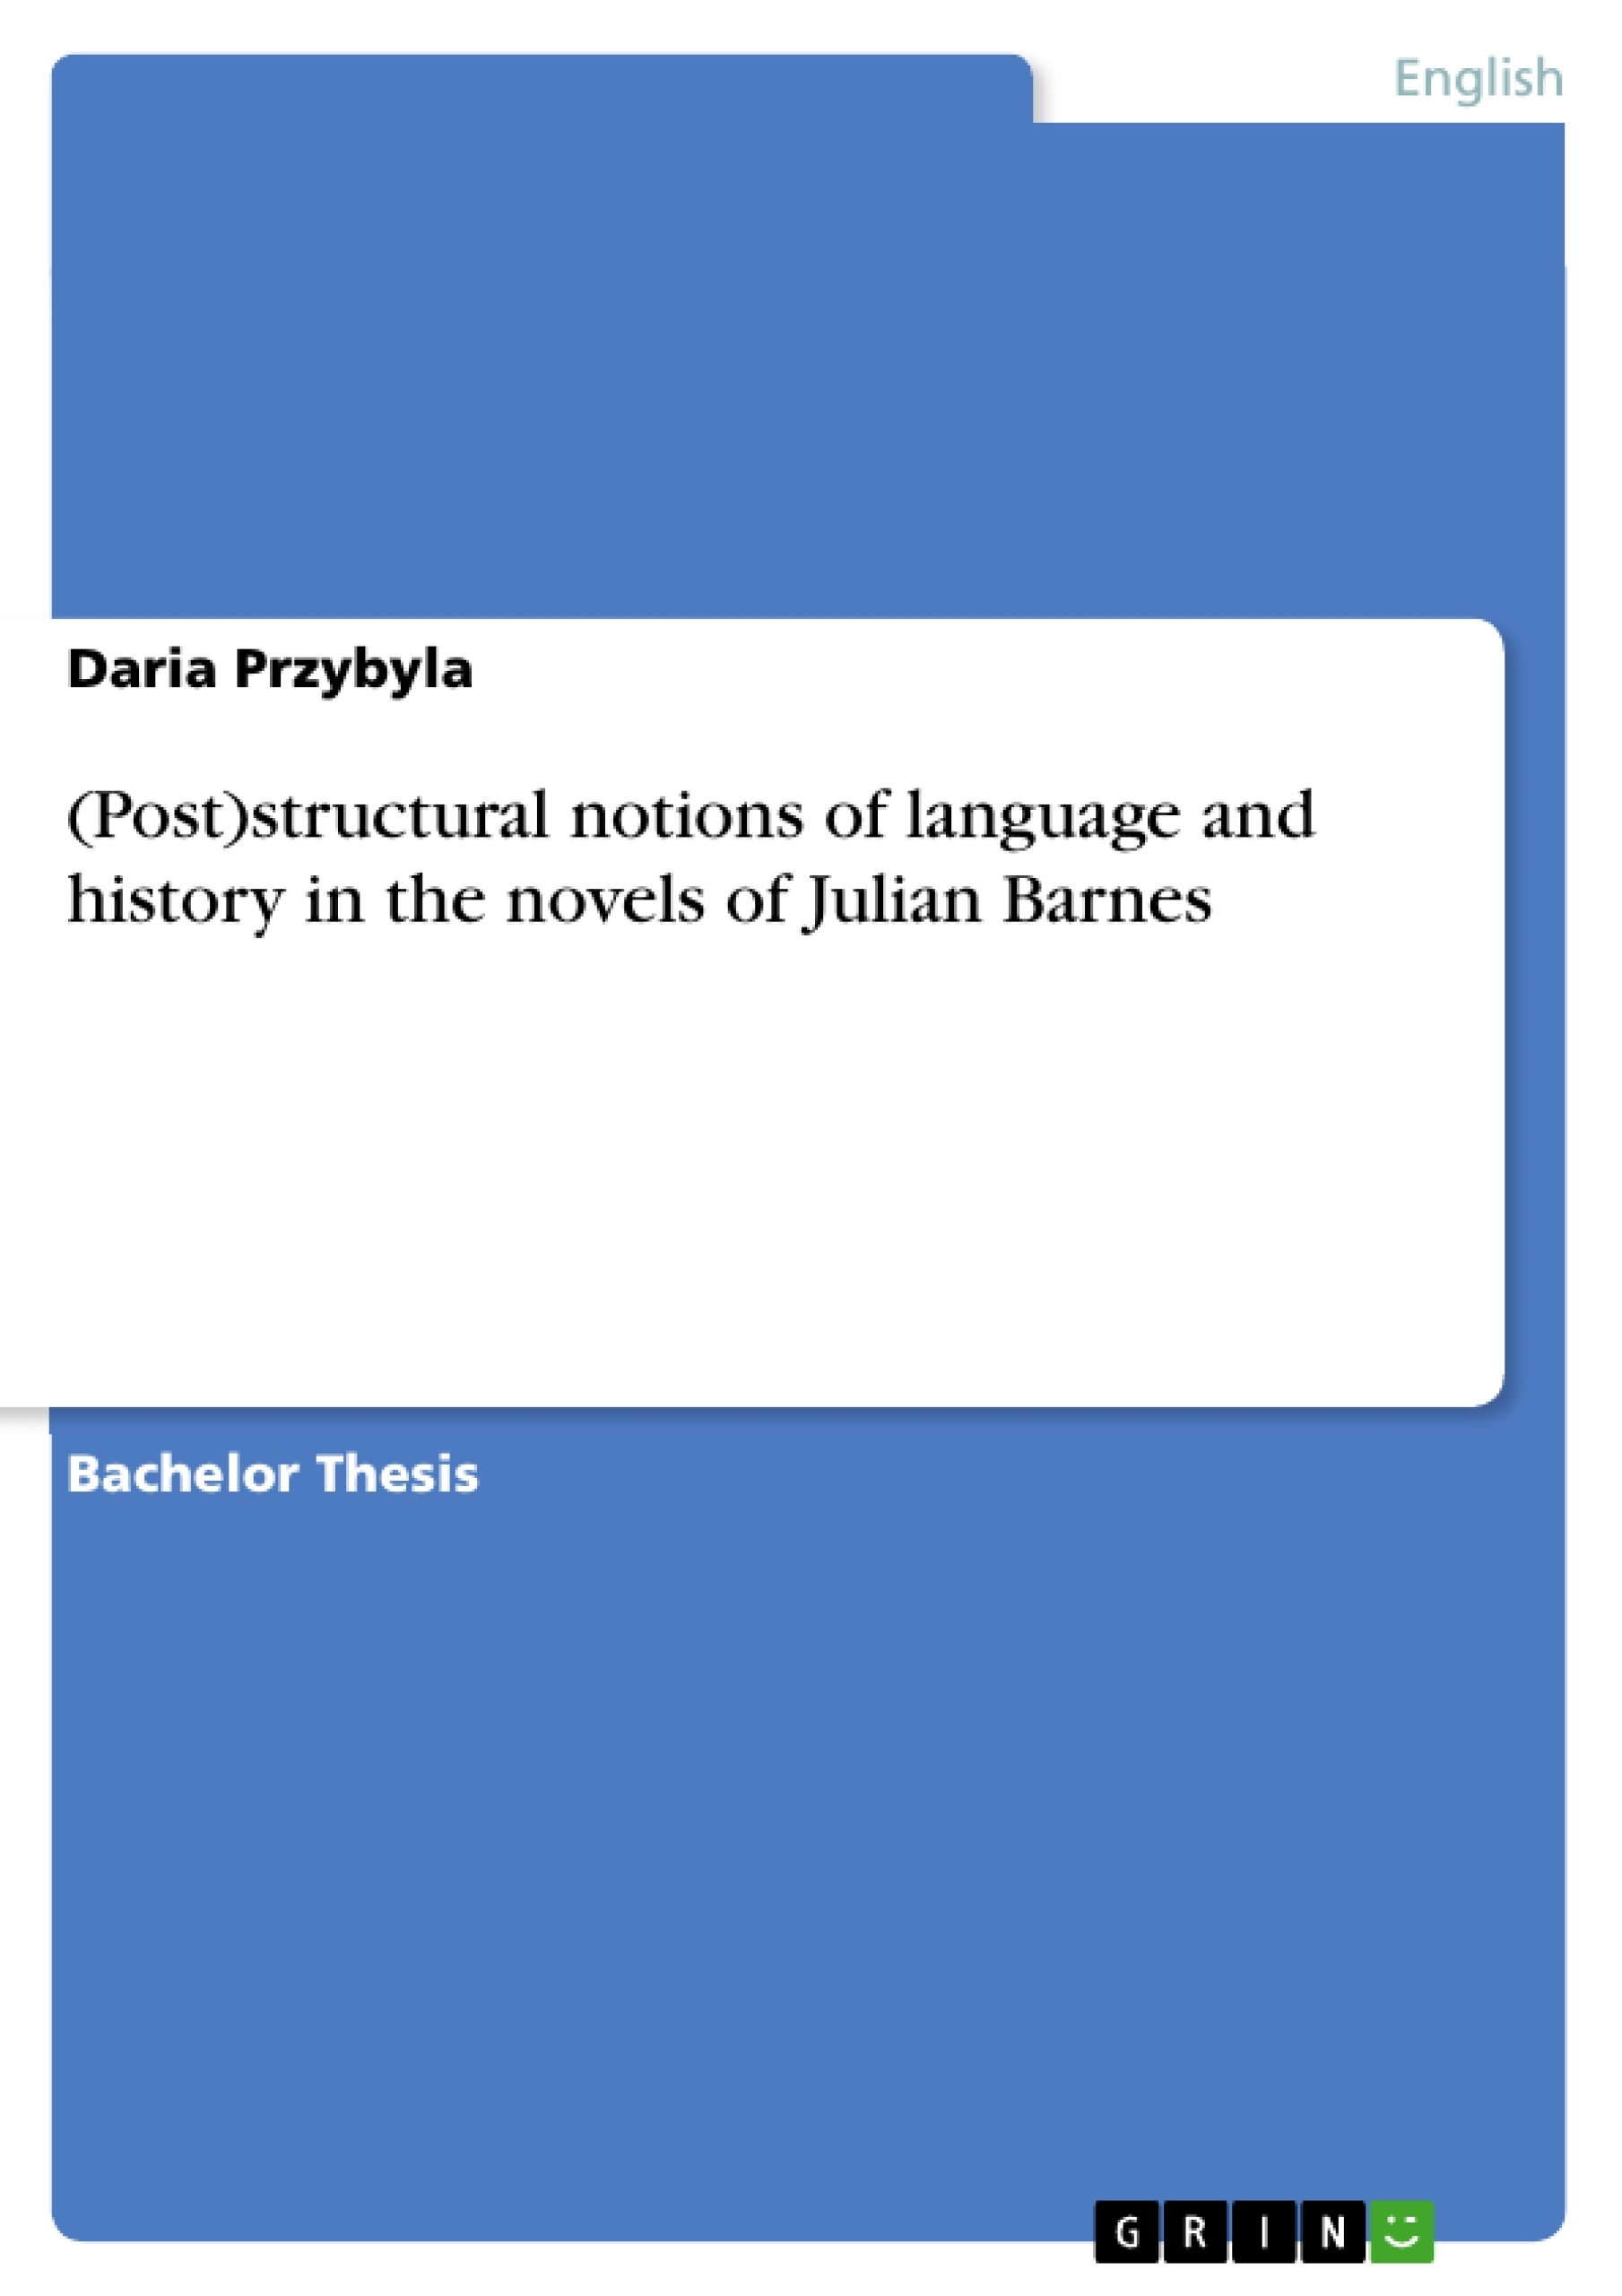 Título: (Post)structural notions of language and history in the novels of Julian Barnes